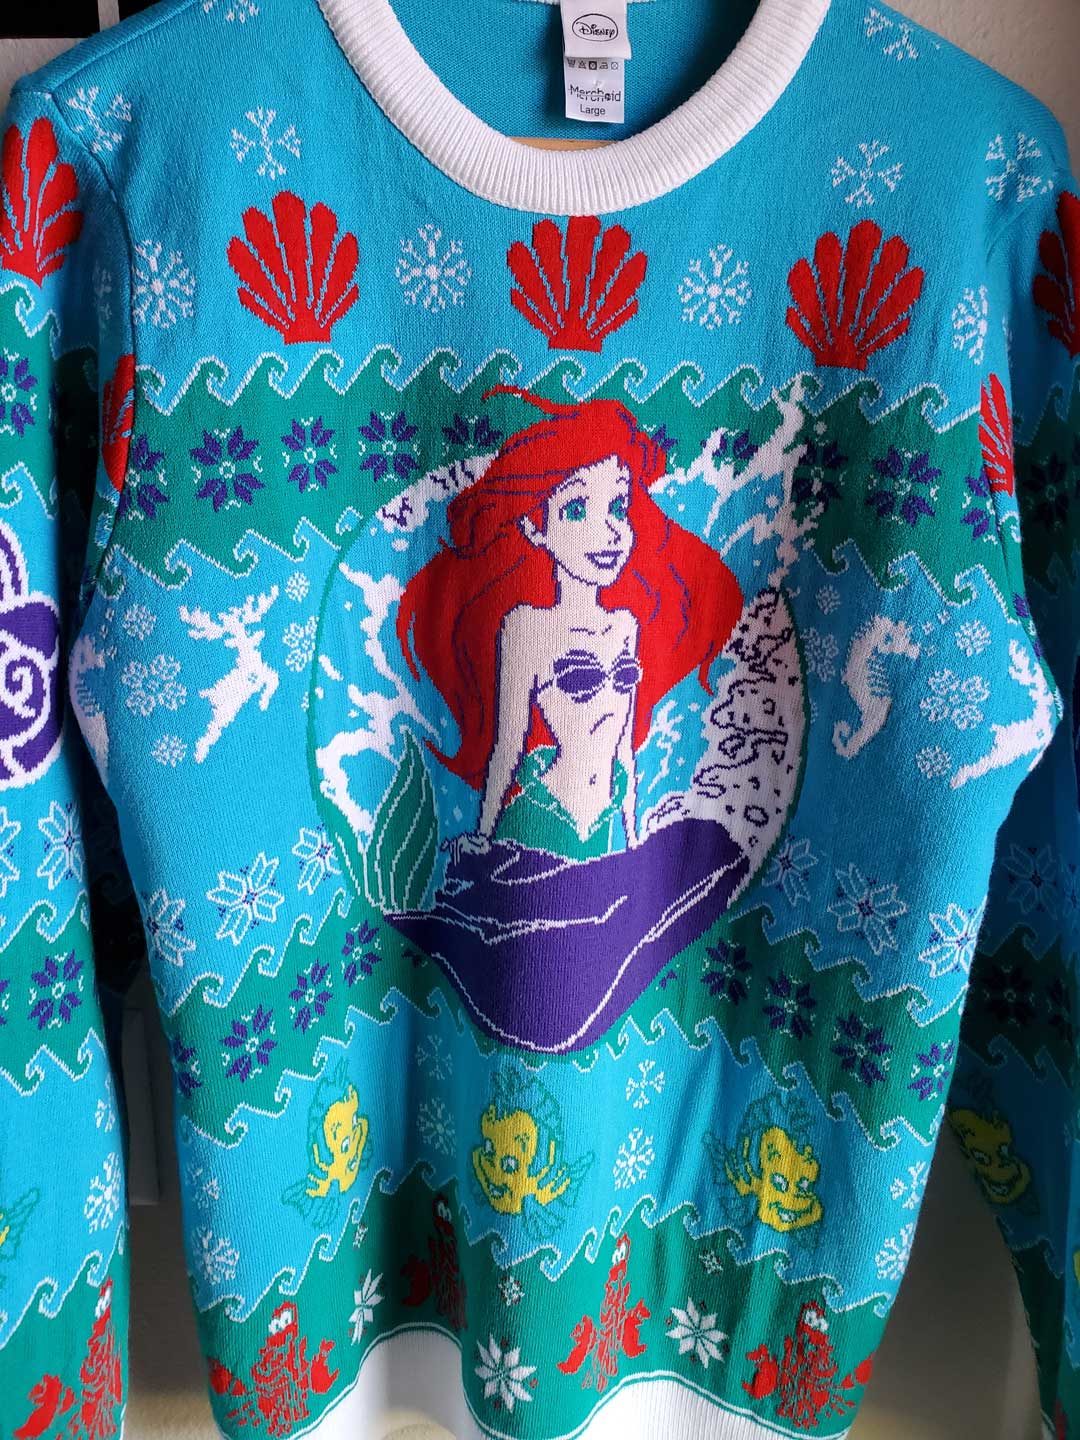 Little Mermaid Christmas Sweater After Washing